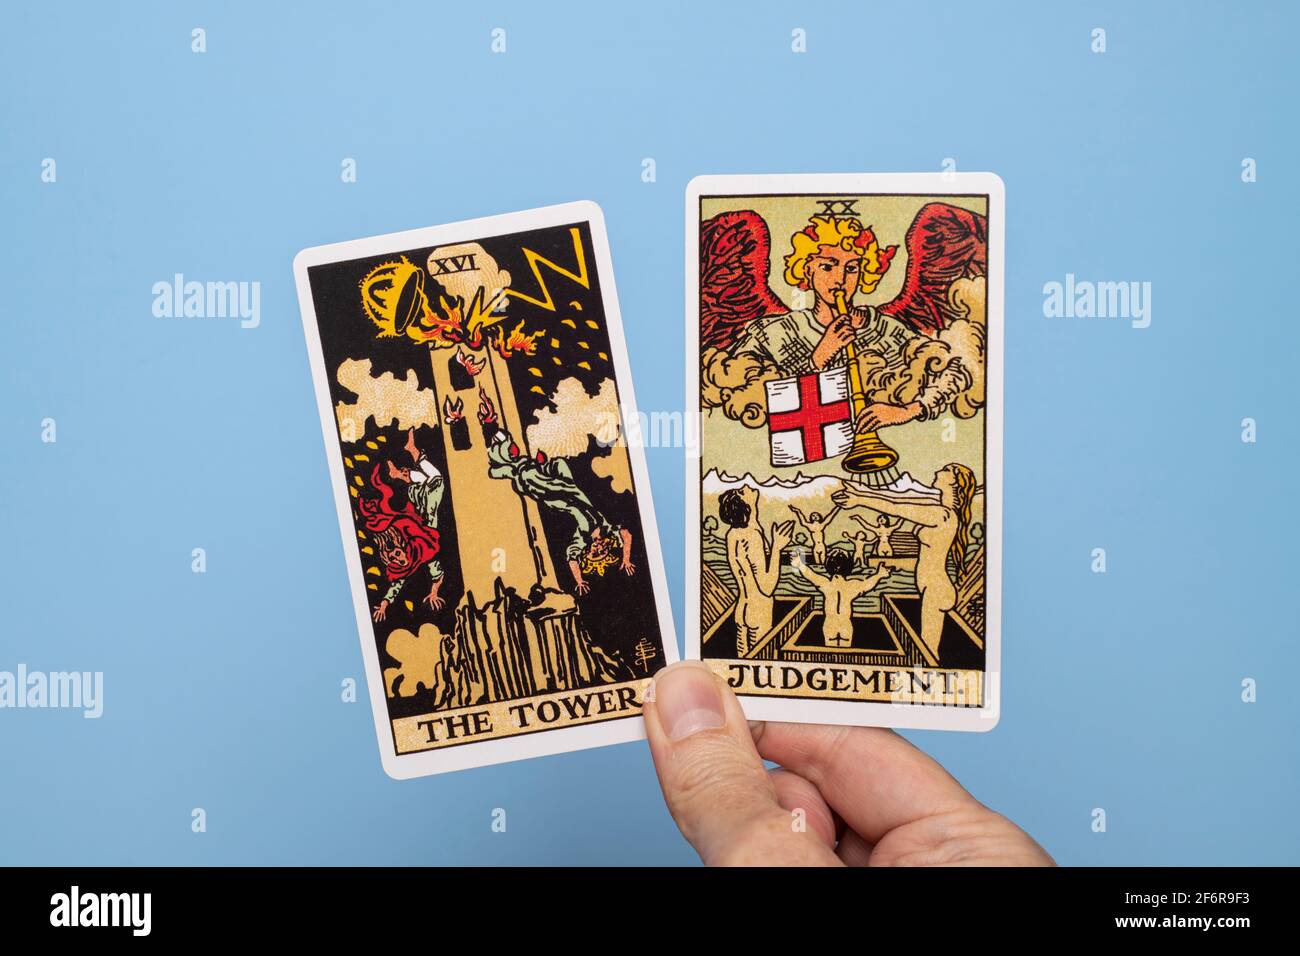 Hand holding up two tarot cards, The Tower and Judgement. Stock Photo